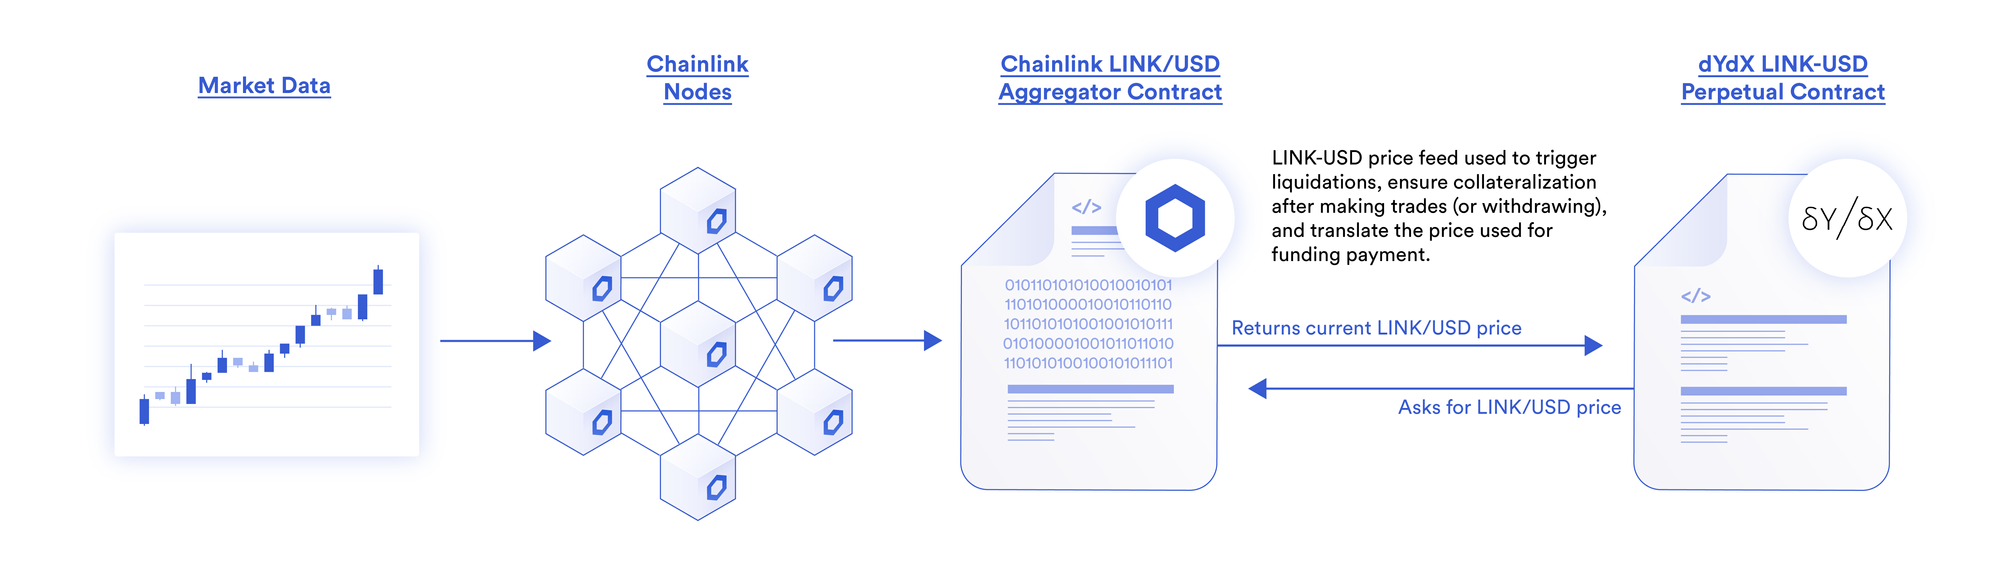 dYdX Chooses Chainlink as its Oracle Provider for New Market